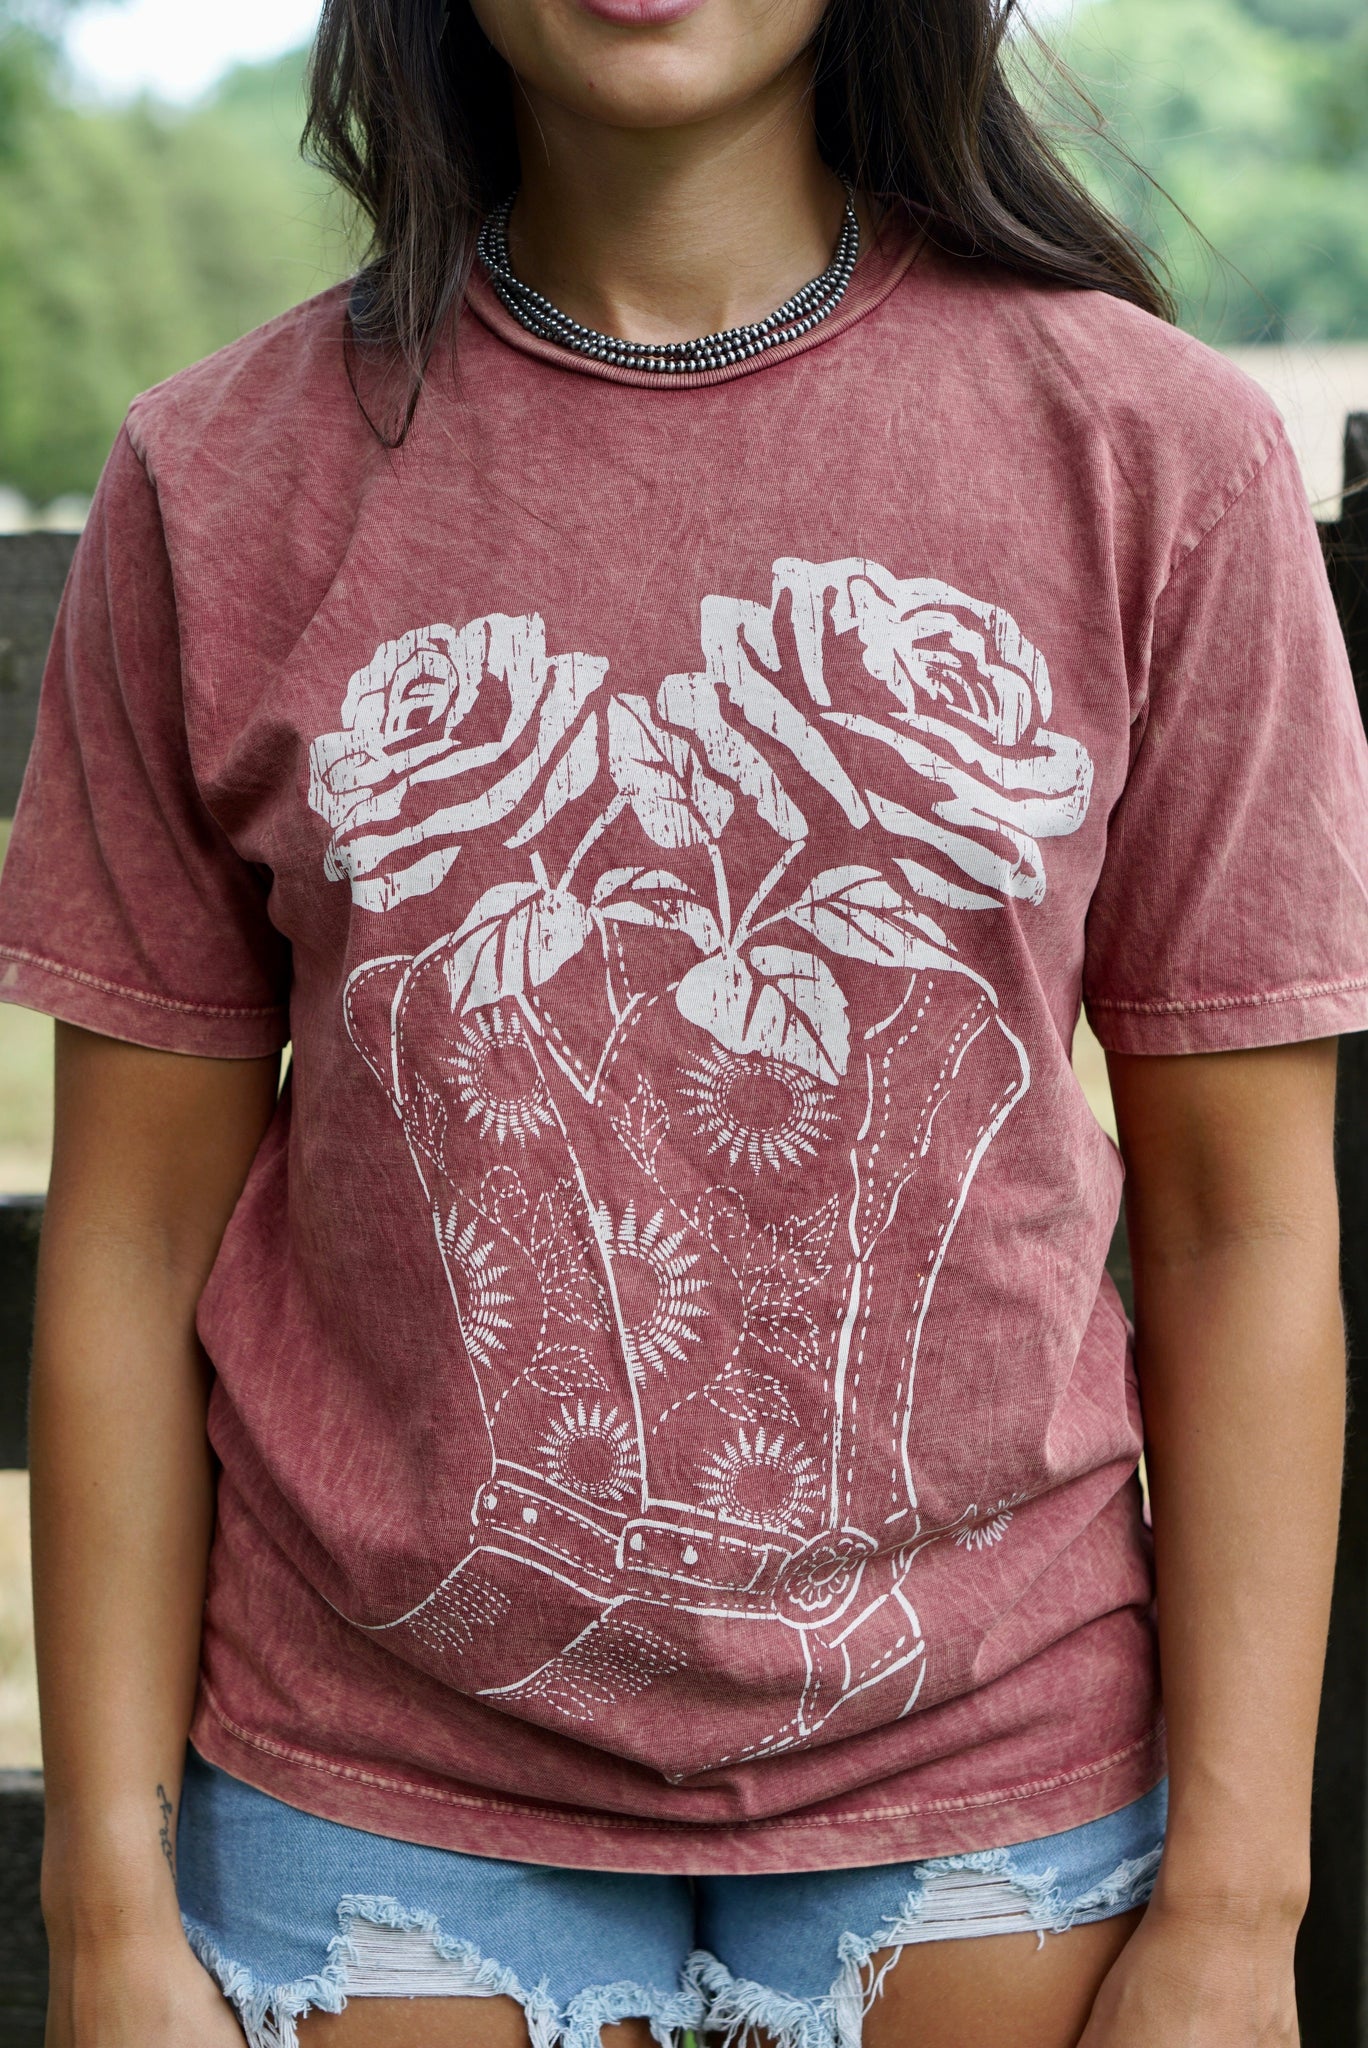 Boots & Roses Graphic Tee